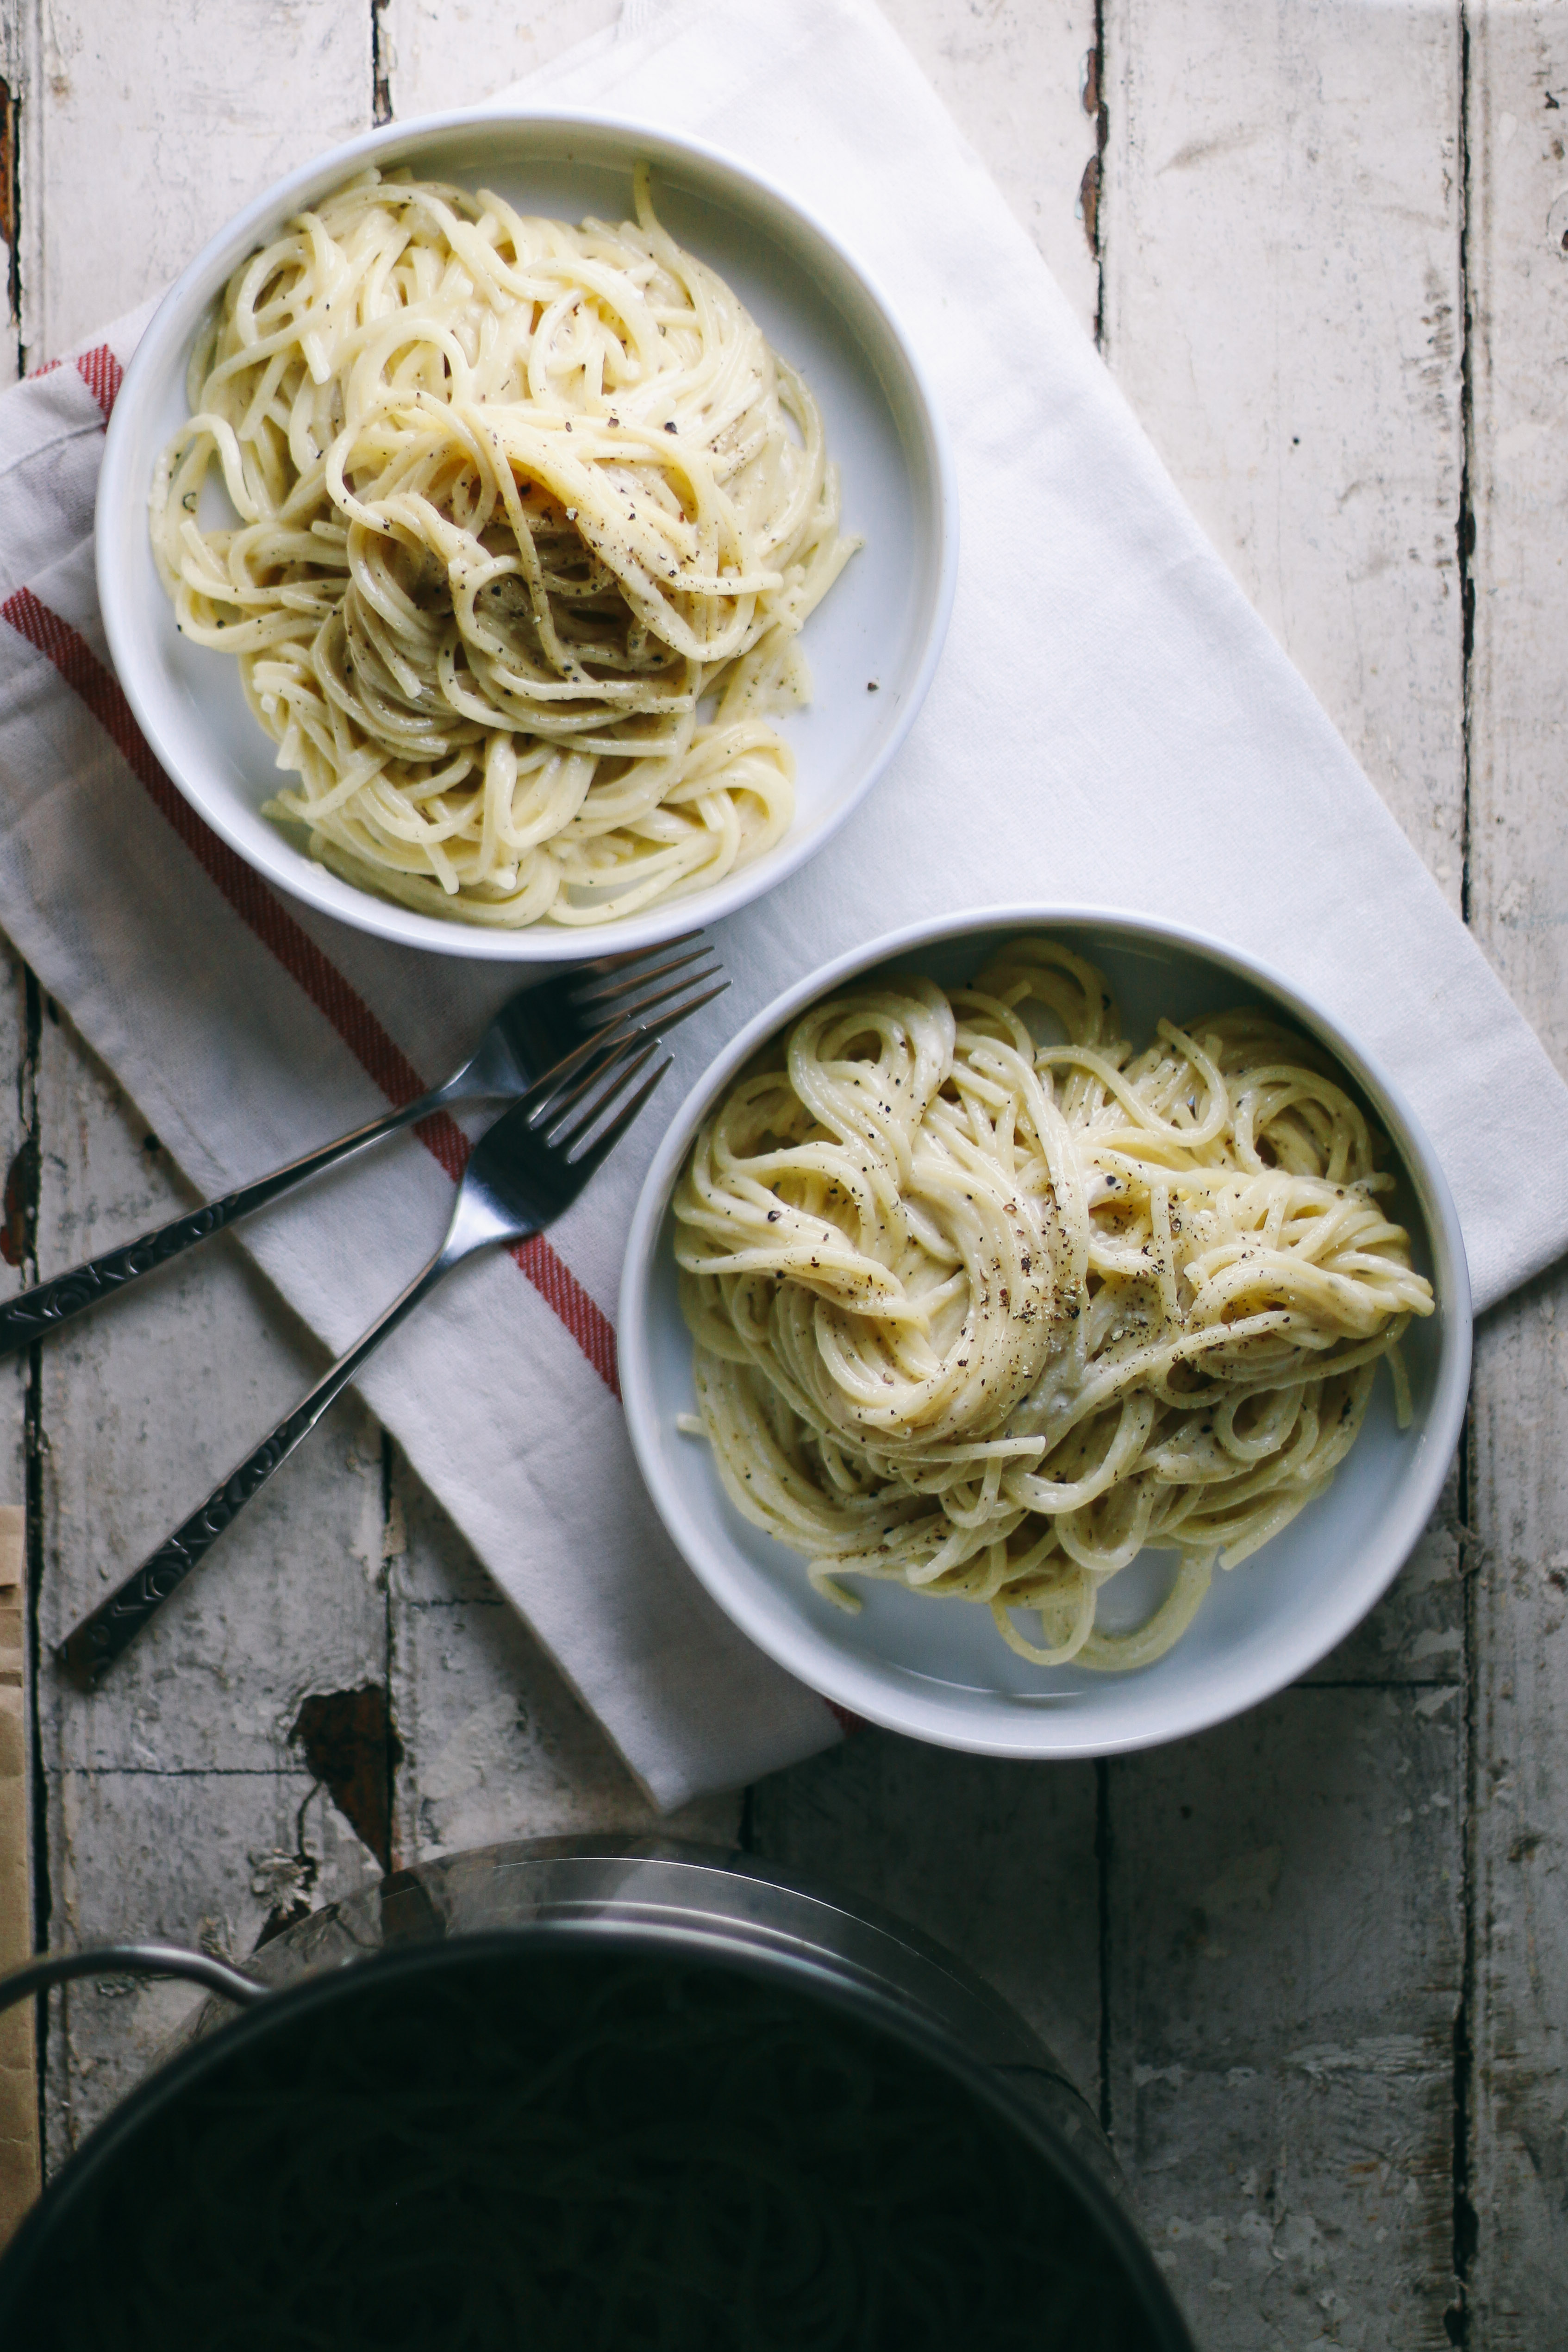 Mom's Cacio e Pepe with Feta Cheese | I Will Not Eat Oysters